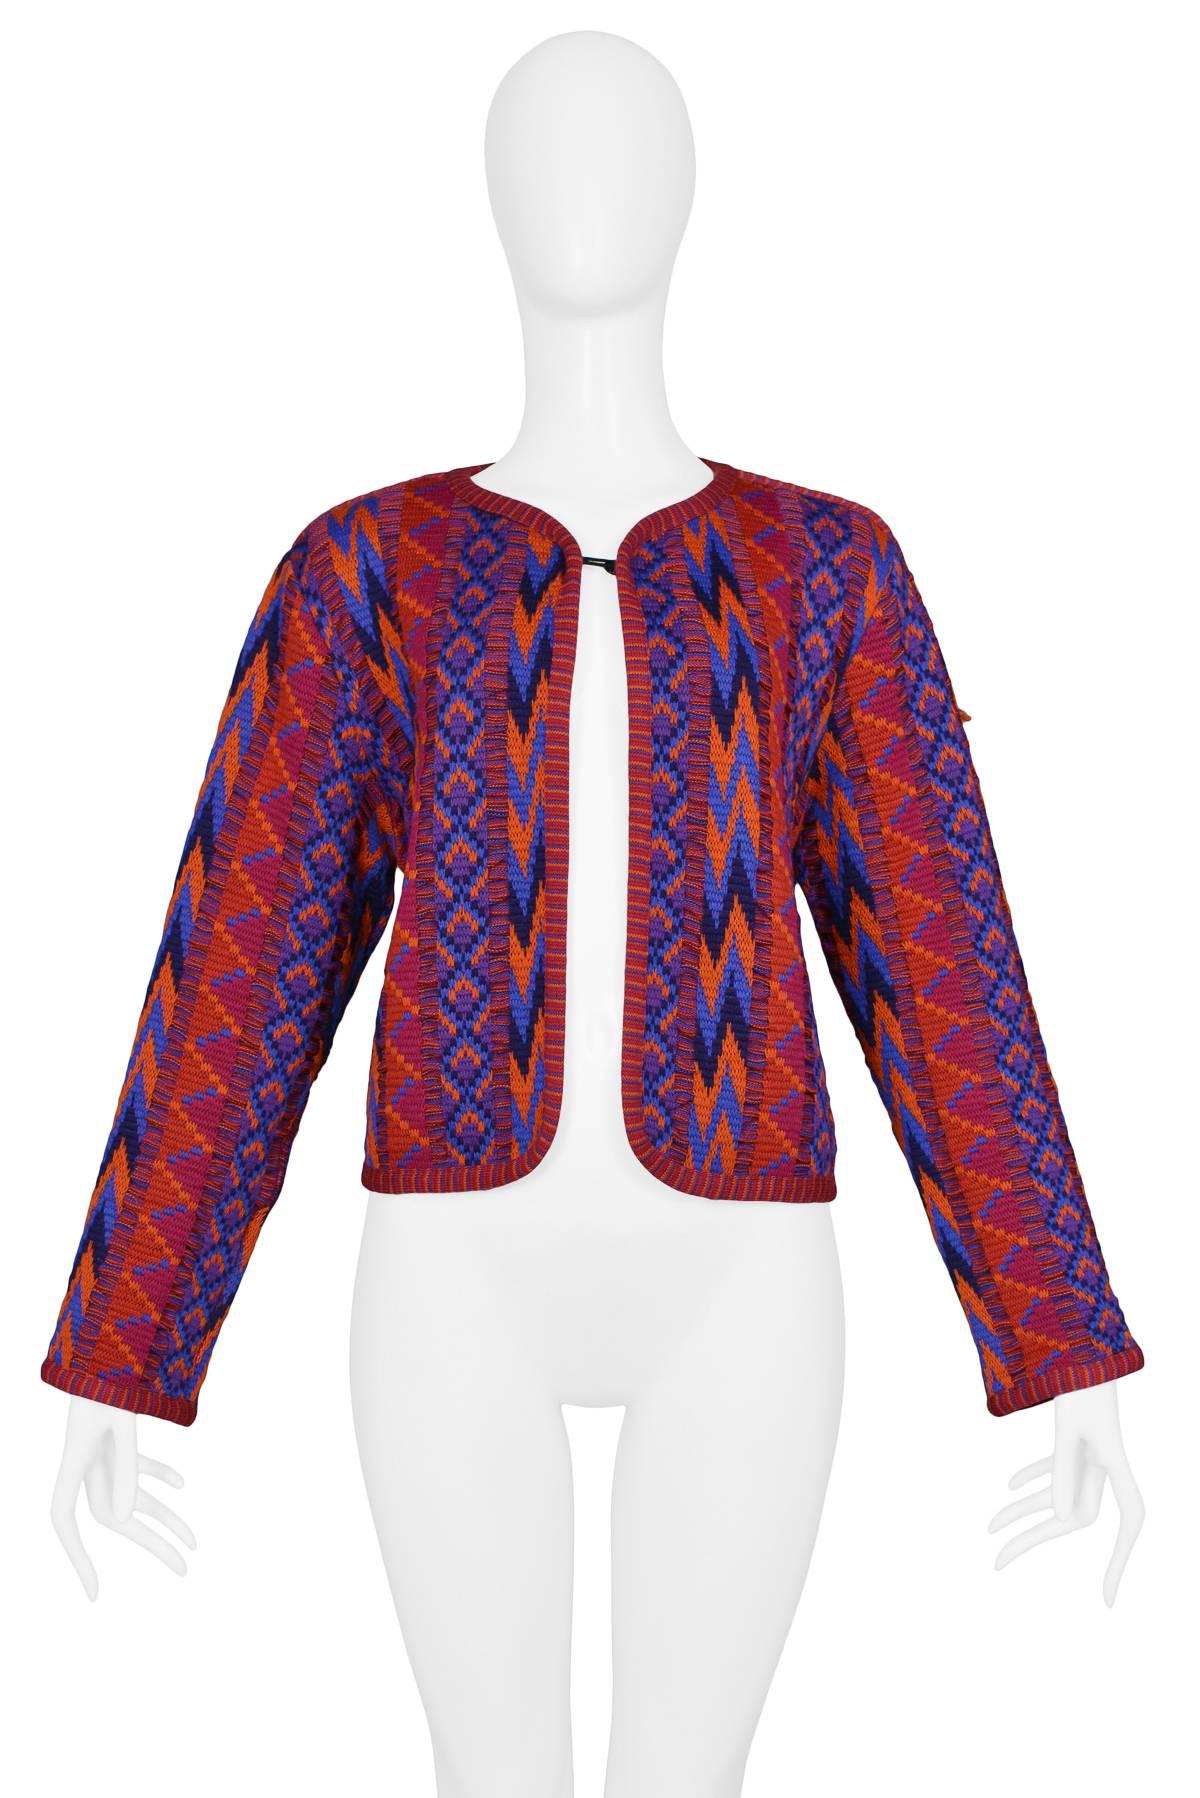 Vintage Yves Saint Laurent purple and fuchsia knit jacket featuring an allover tribal pattern.
Please inquire for additional images.